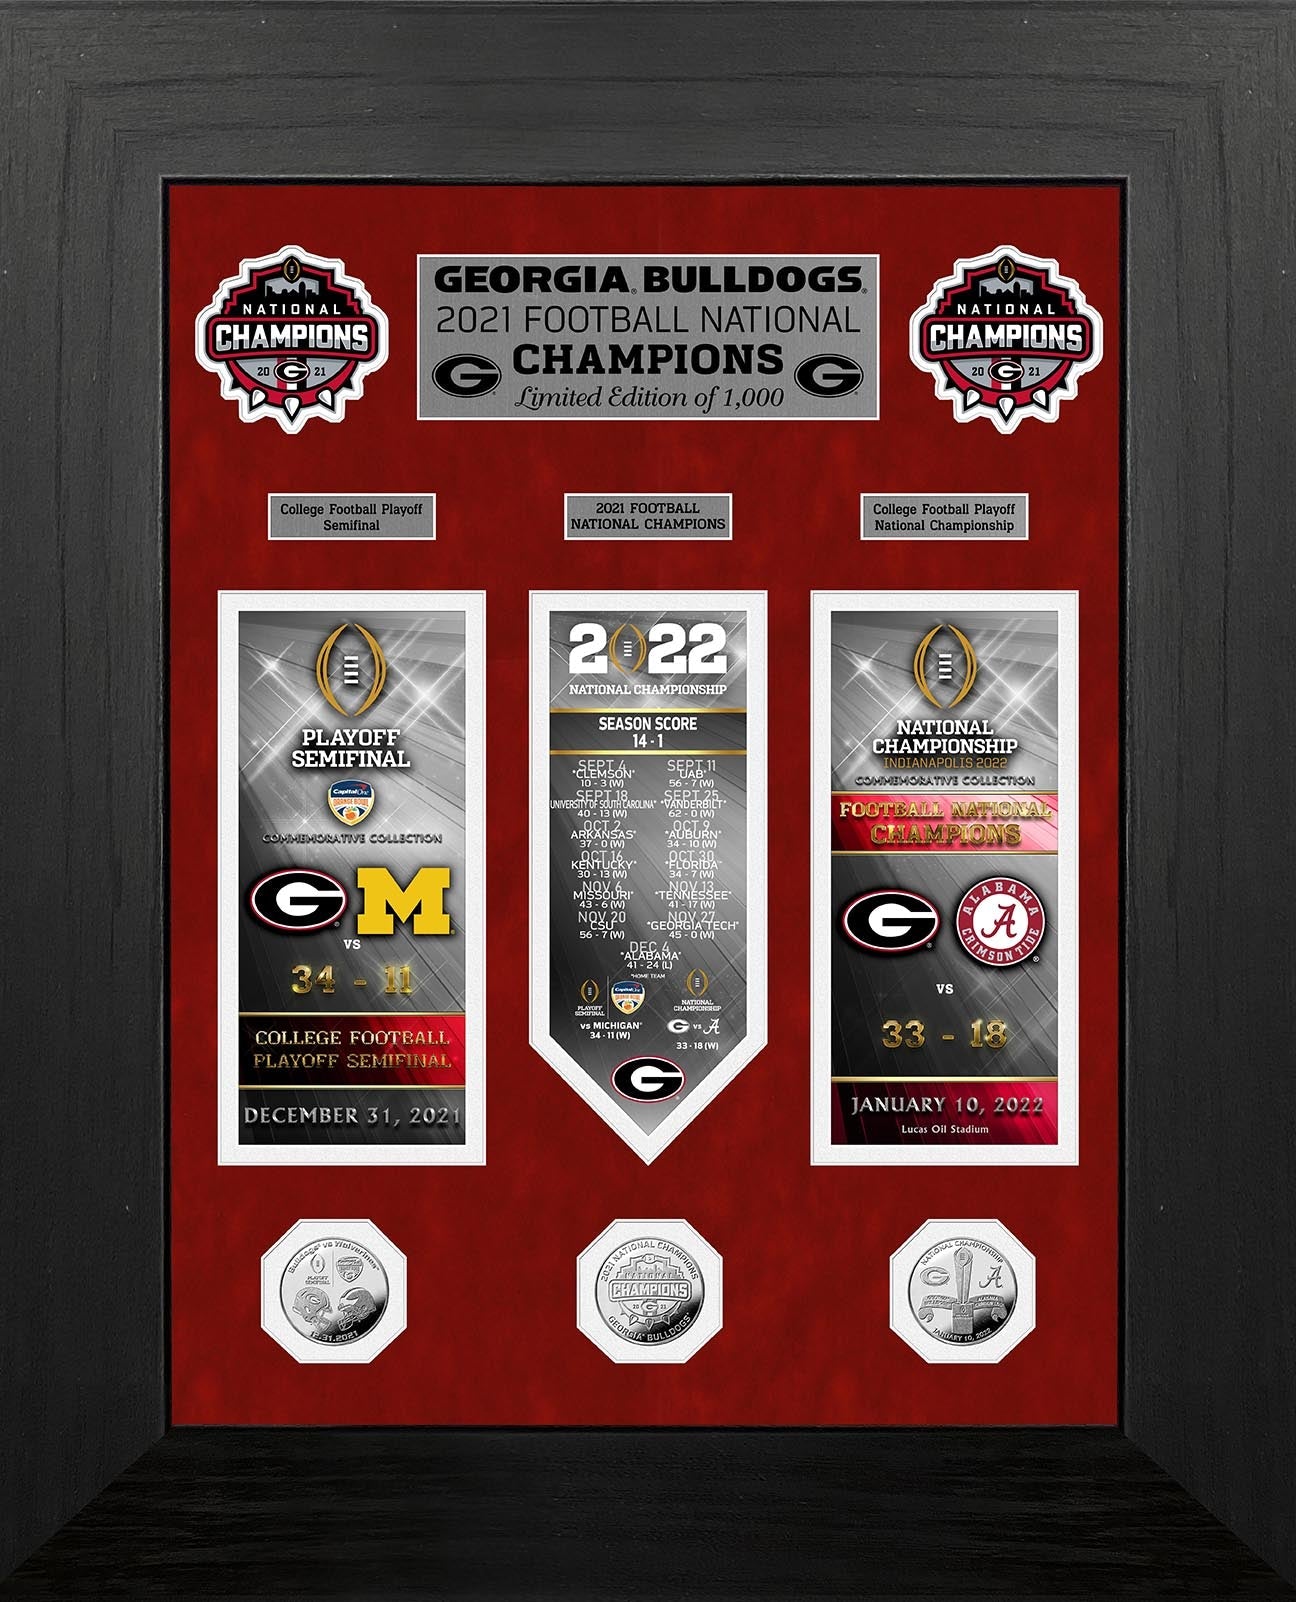 Georgia Bulldogs 2021/22 Football National Champions Deluxe Silver Coin Ticket Collection